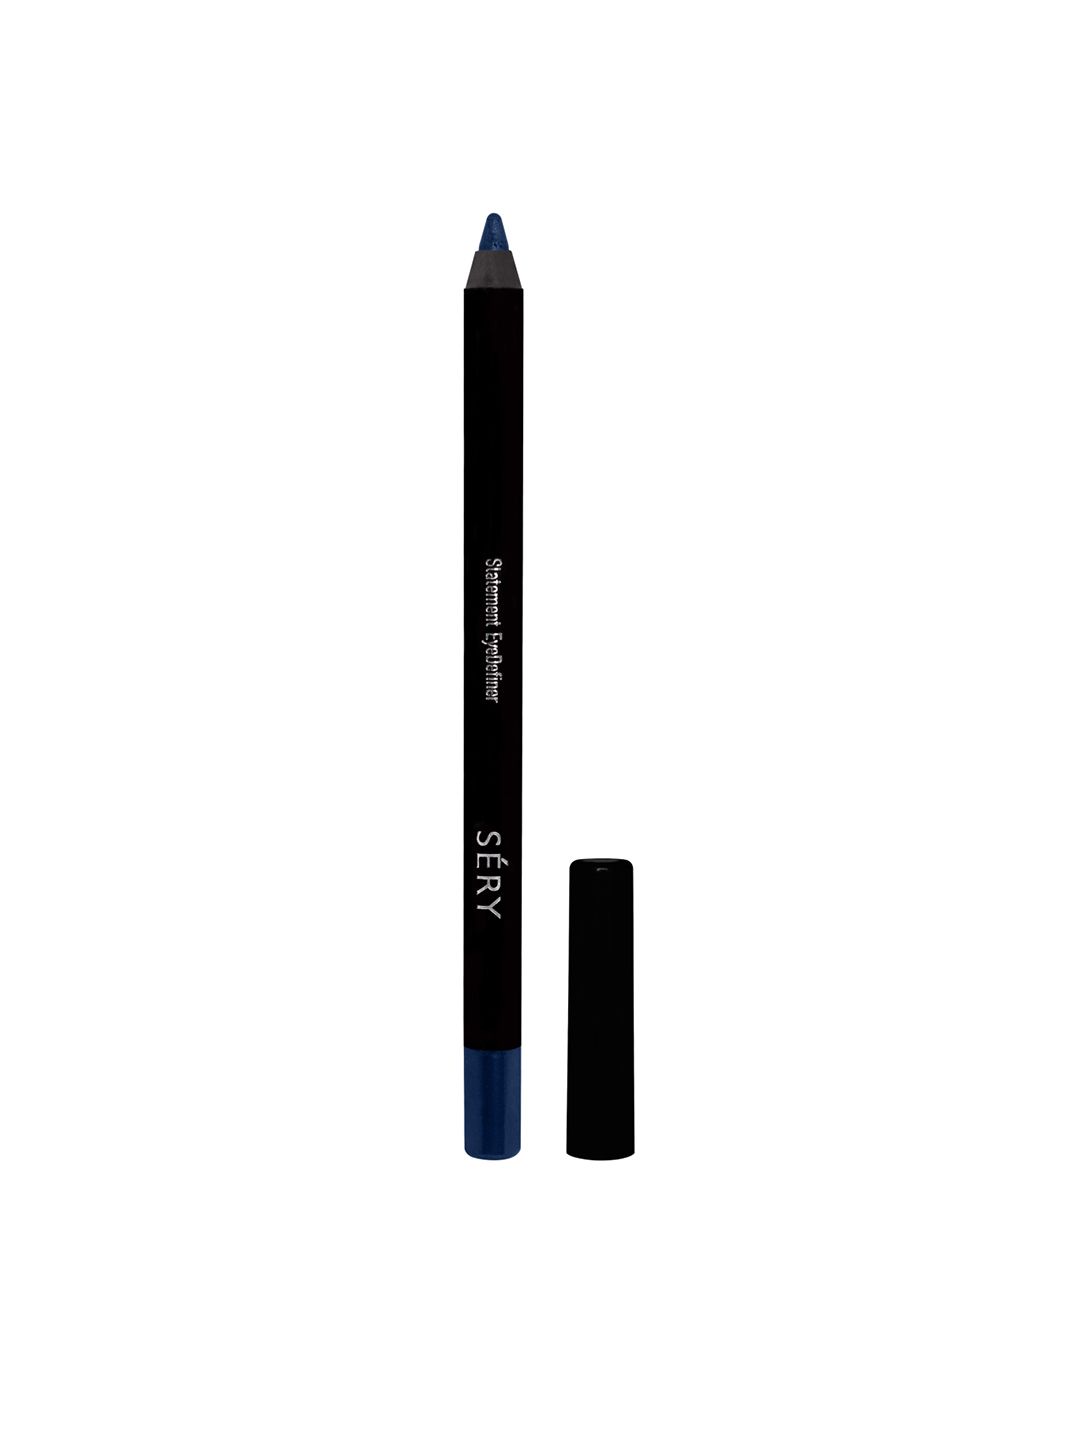 SERY Statement EyeDefiner 24 Hours Stay One Stroke Colour Eyeliner Pencil - Cool Indigo Price in India